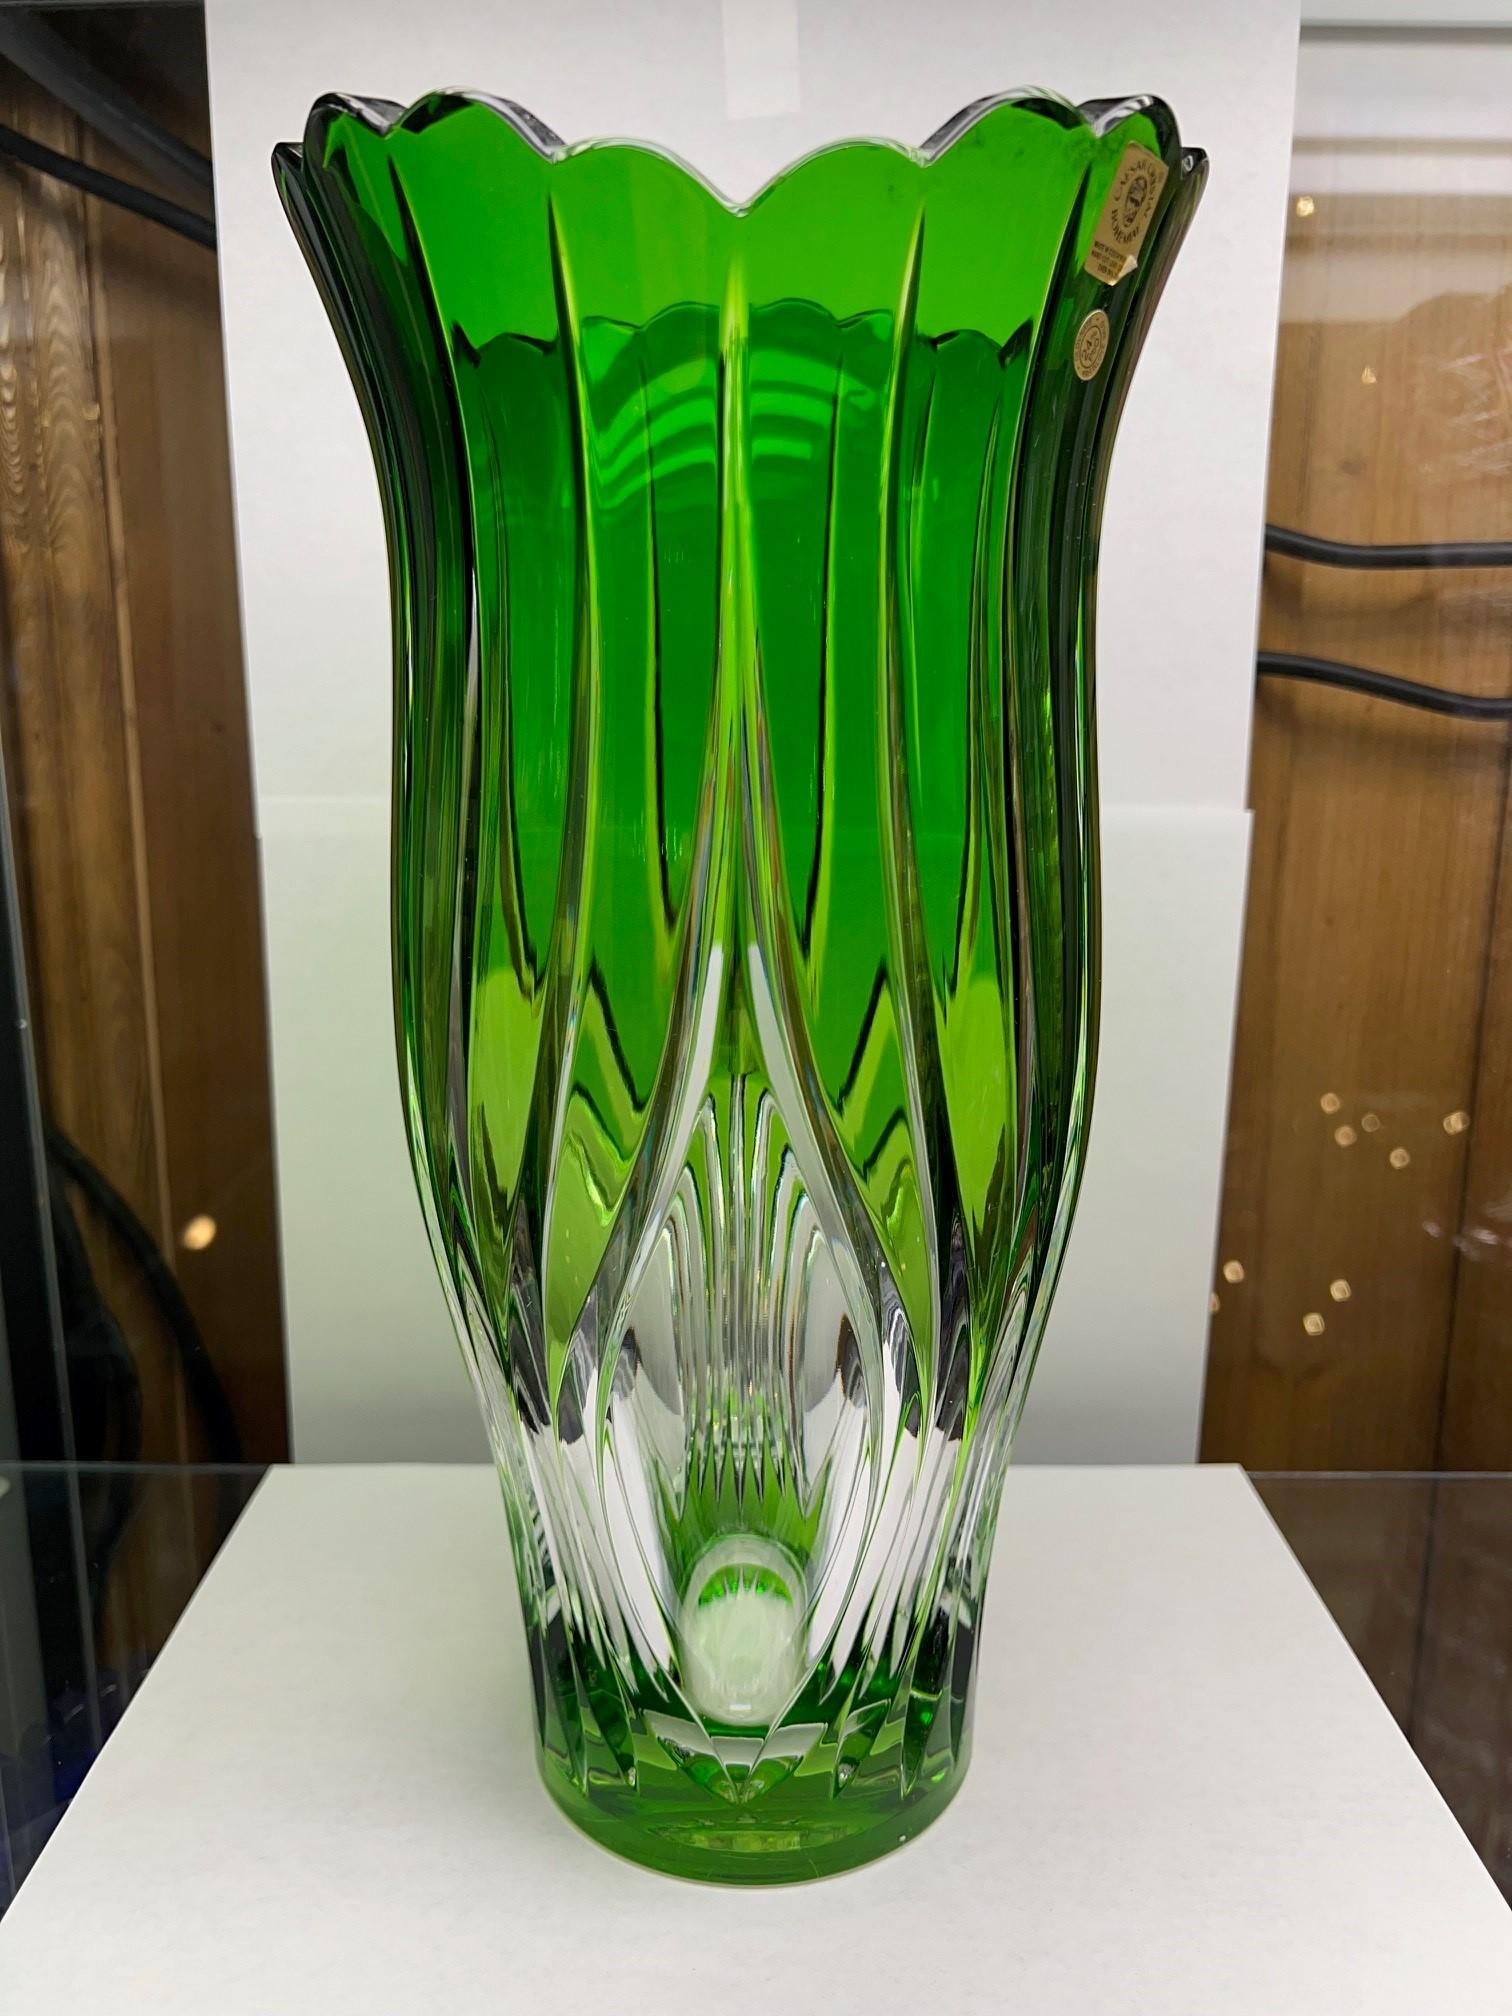 Stunning hand cut lead crystal vase created as a work of art by the hands of the finest Czech glass workers. The Caesar Crystal Company in the Czech Republic has been selling hand cut lead crystal pieces since 1861 and is known as one of the finest